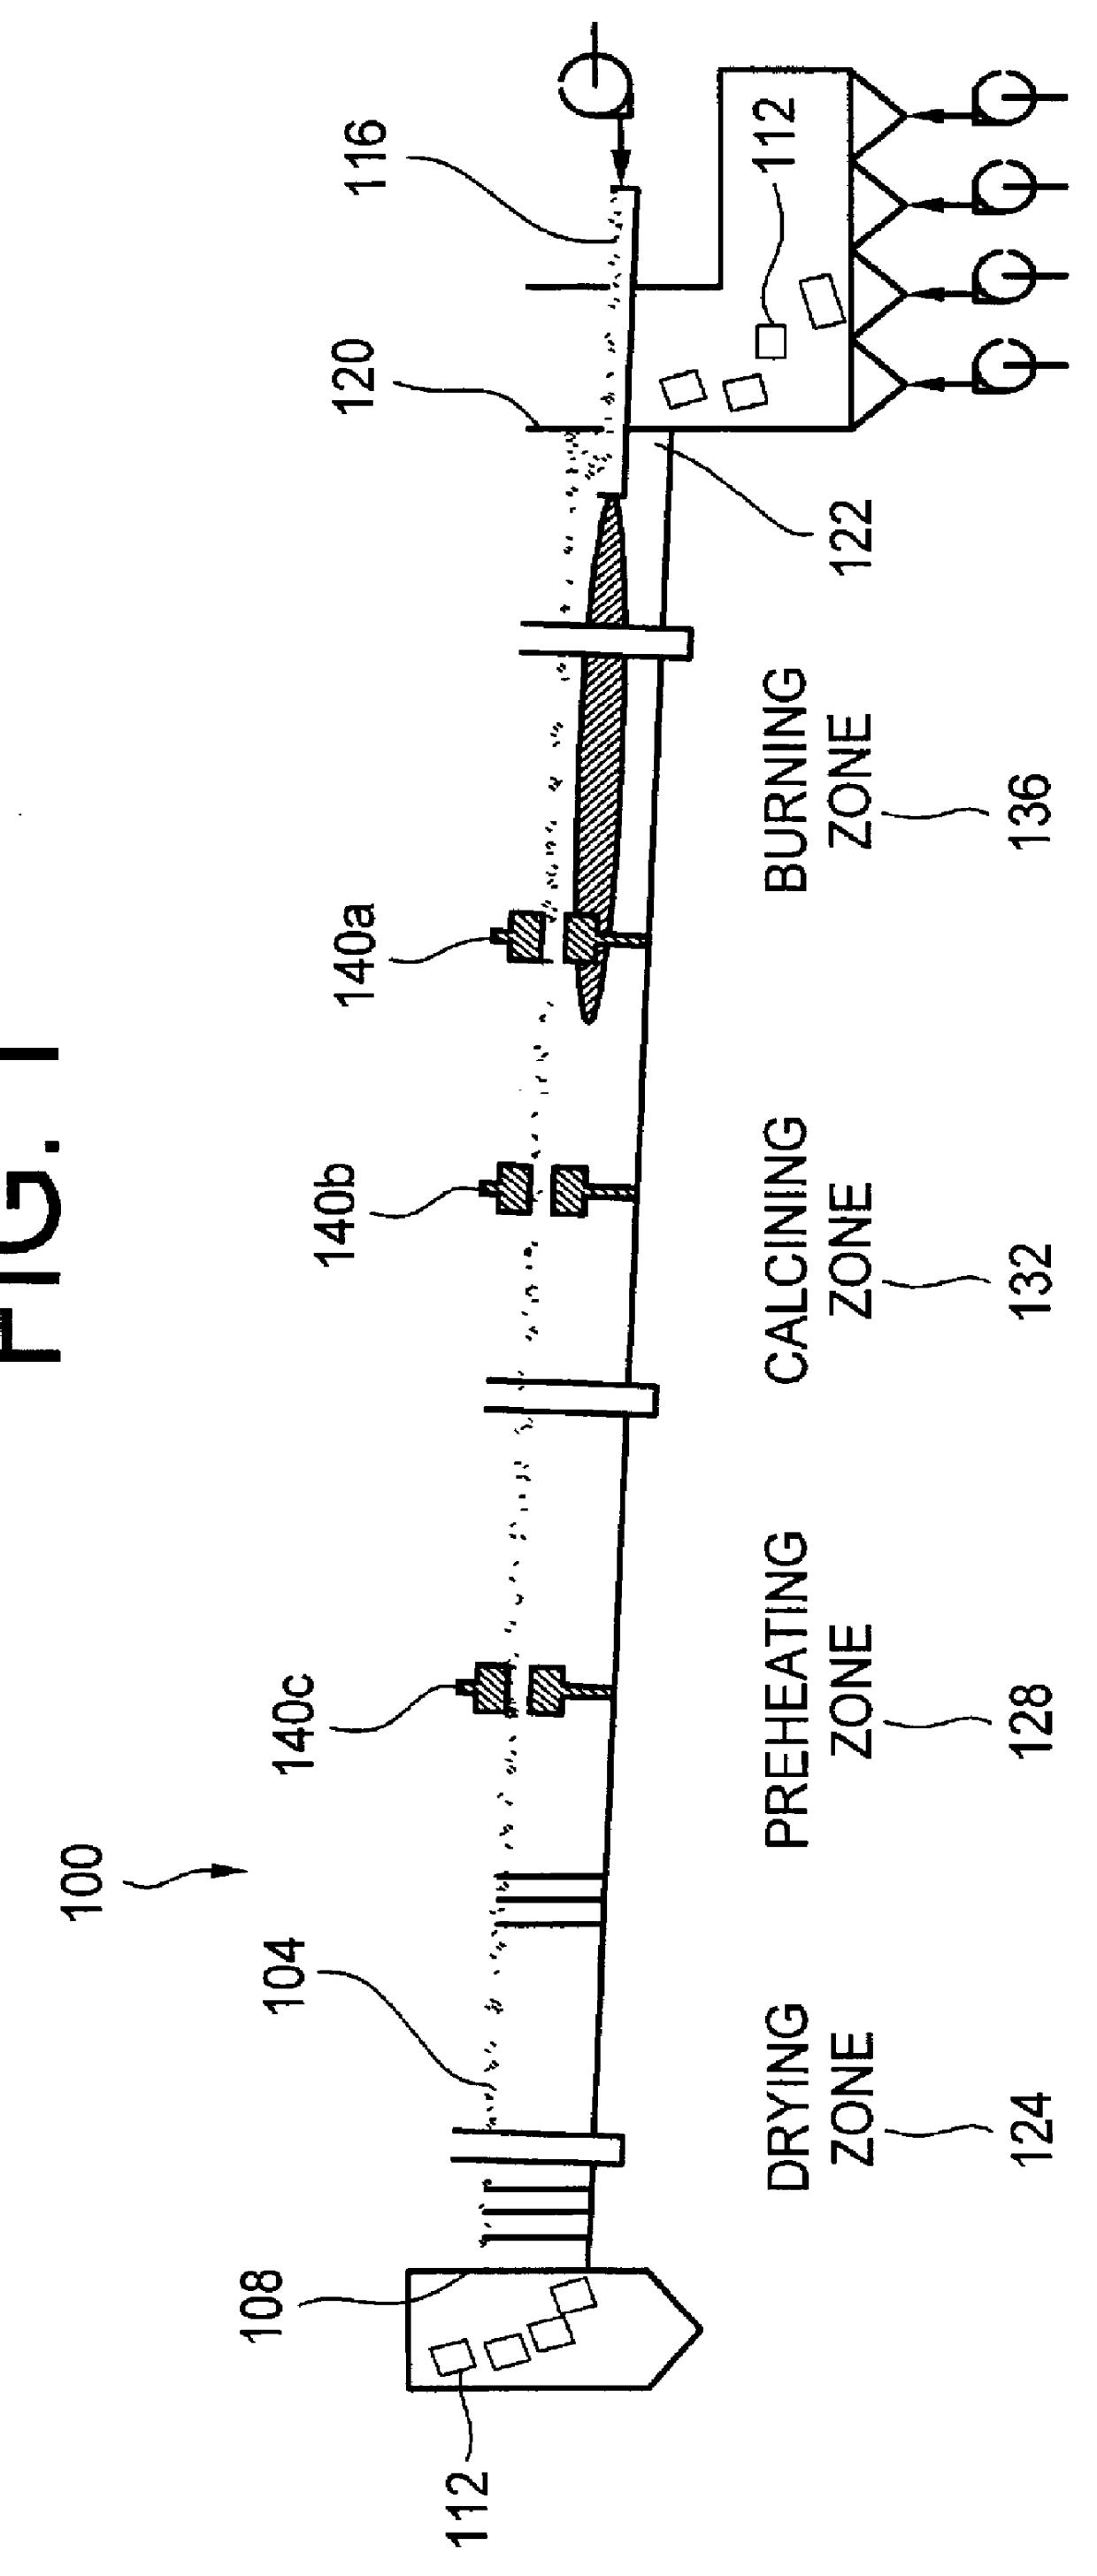 System and method for oxidant injection in rotary kilns